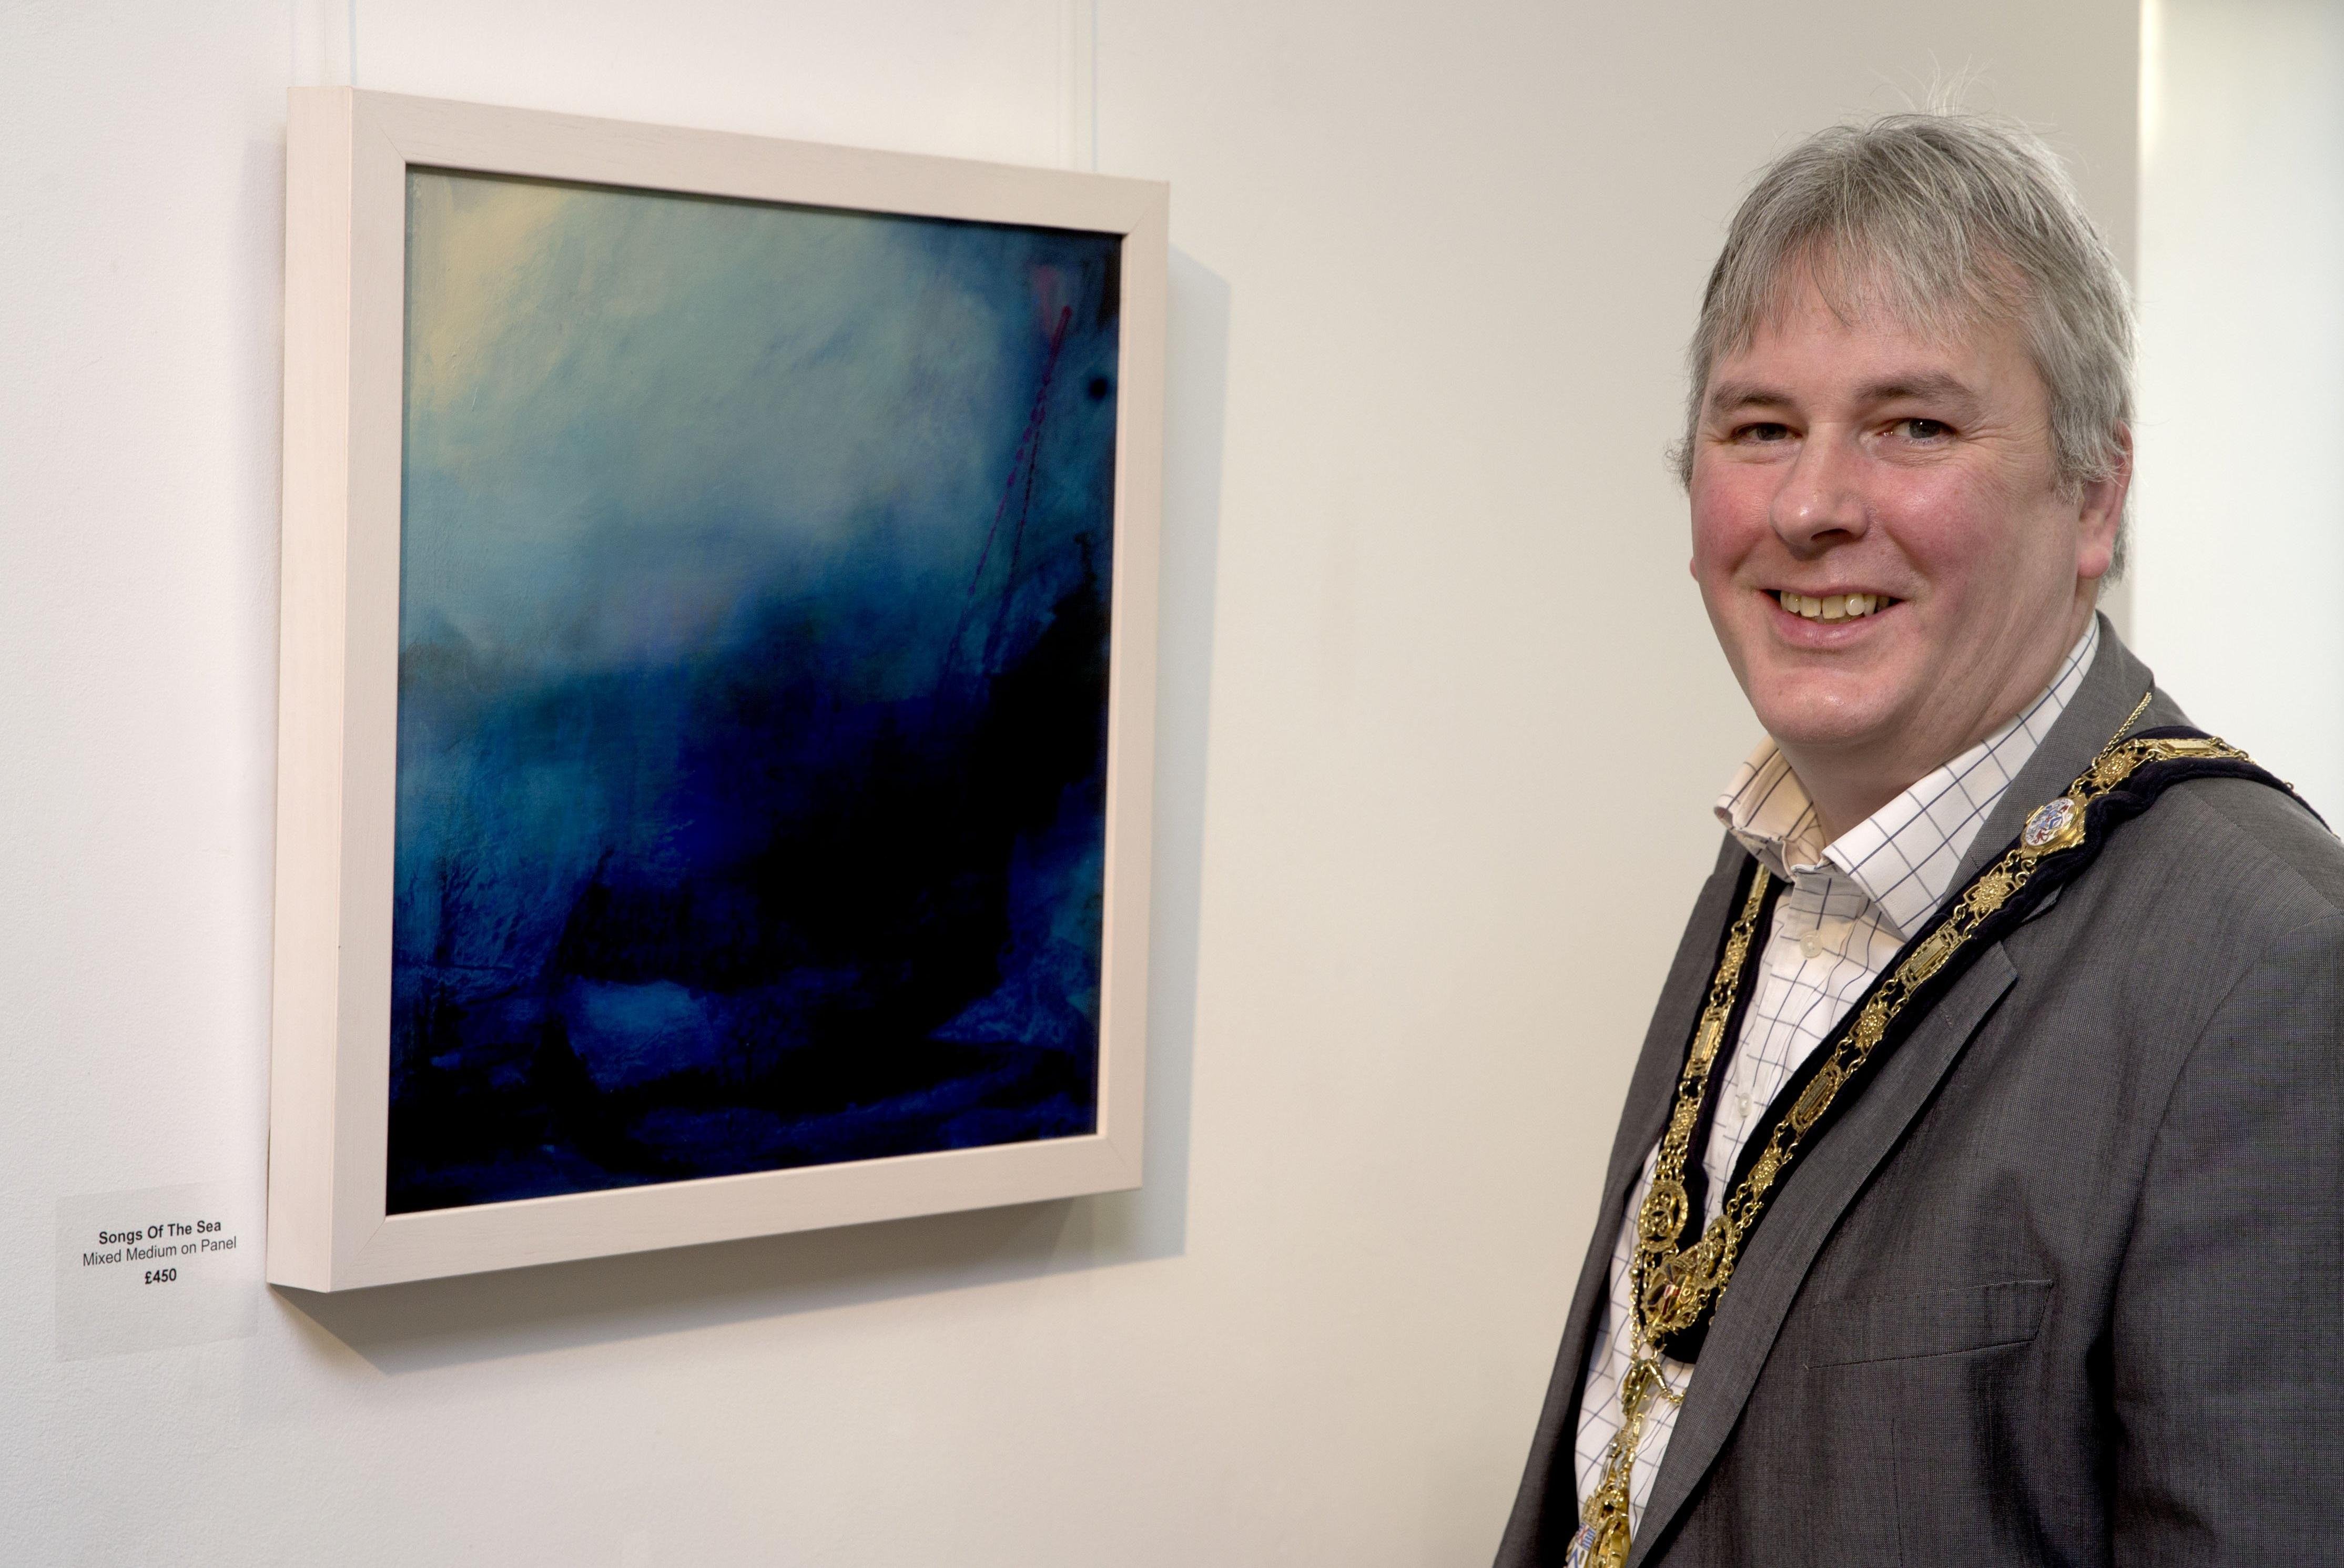 Songs of the Sea exhibition opens at Roe Valley Centre